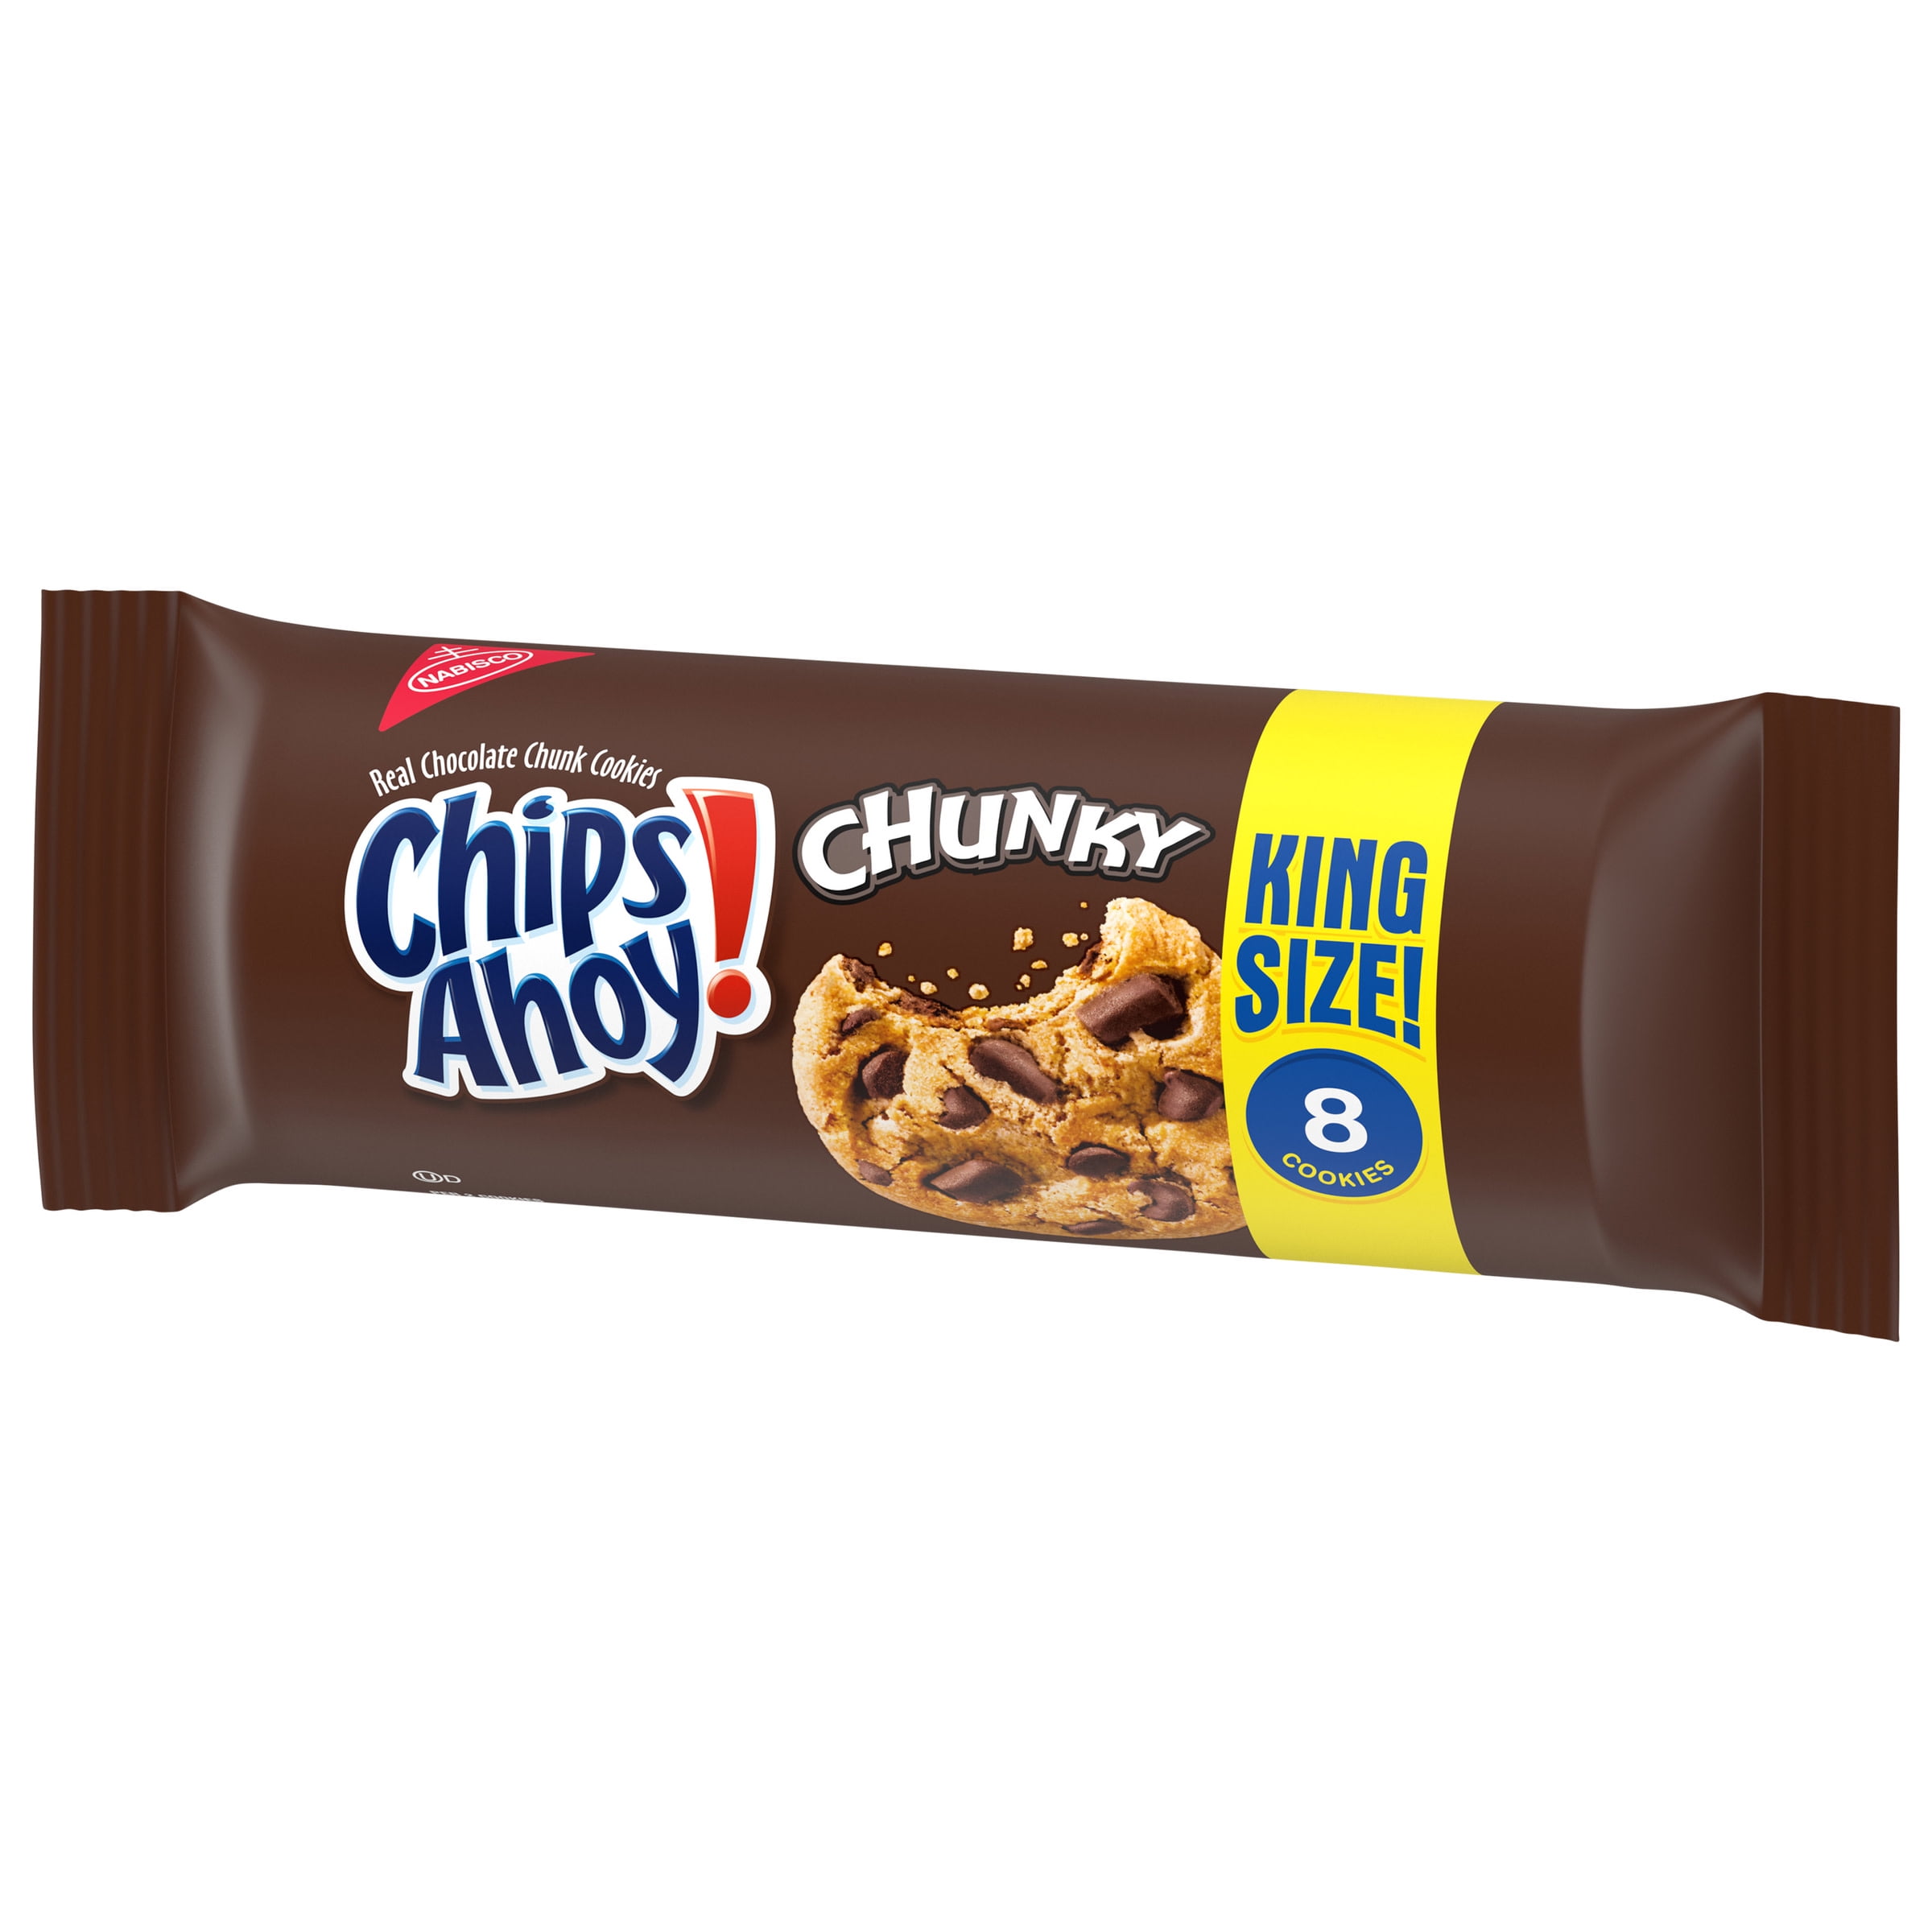 Chips Ahoy! Chunk Chocolate Chip Cookies, King Size, 4.15 Oz